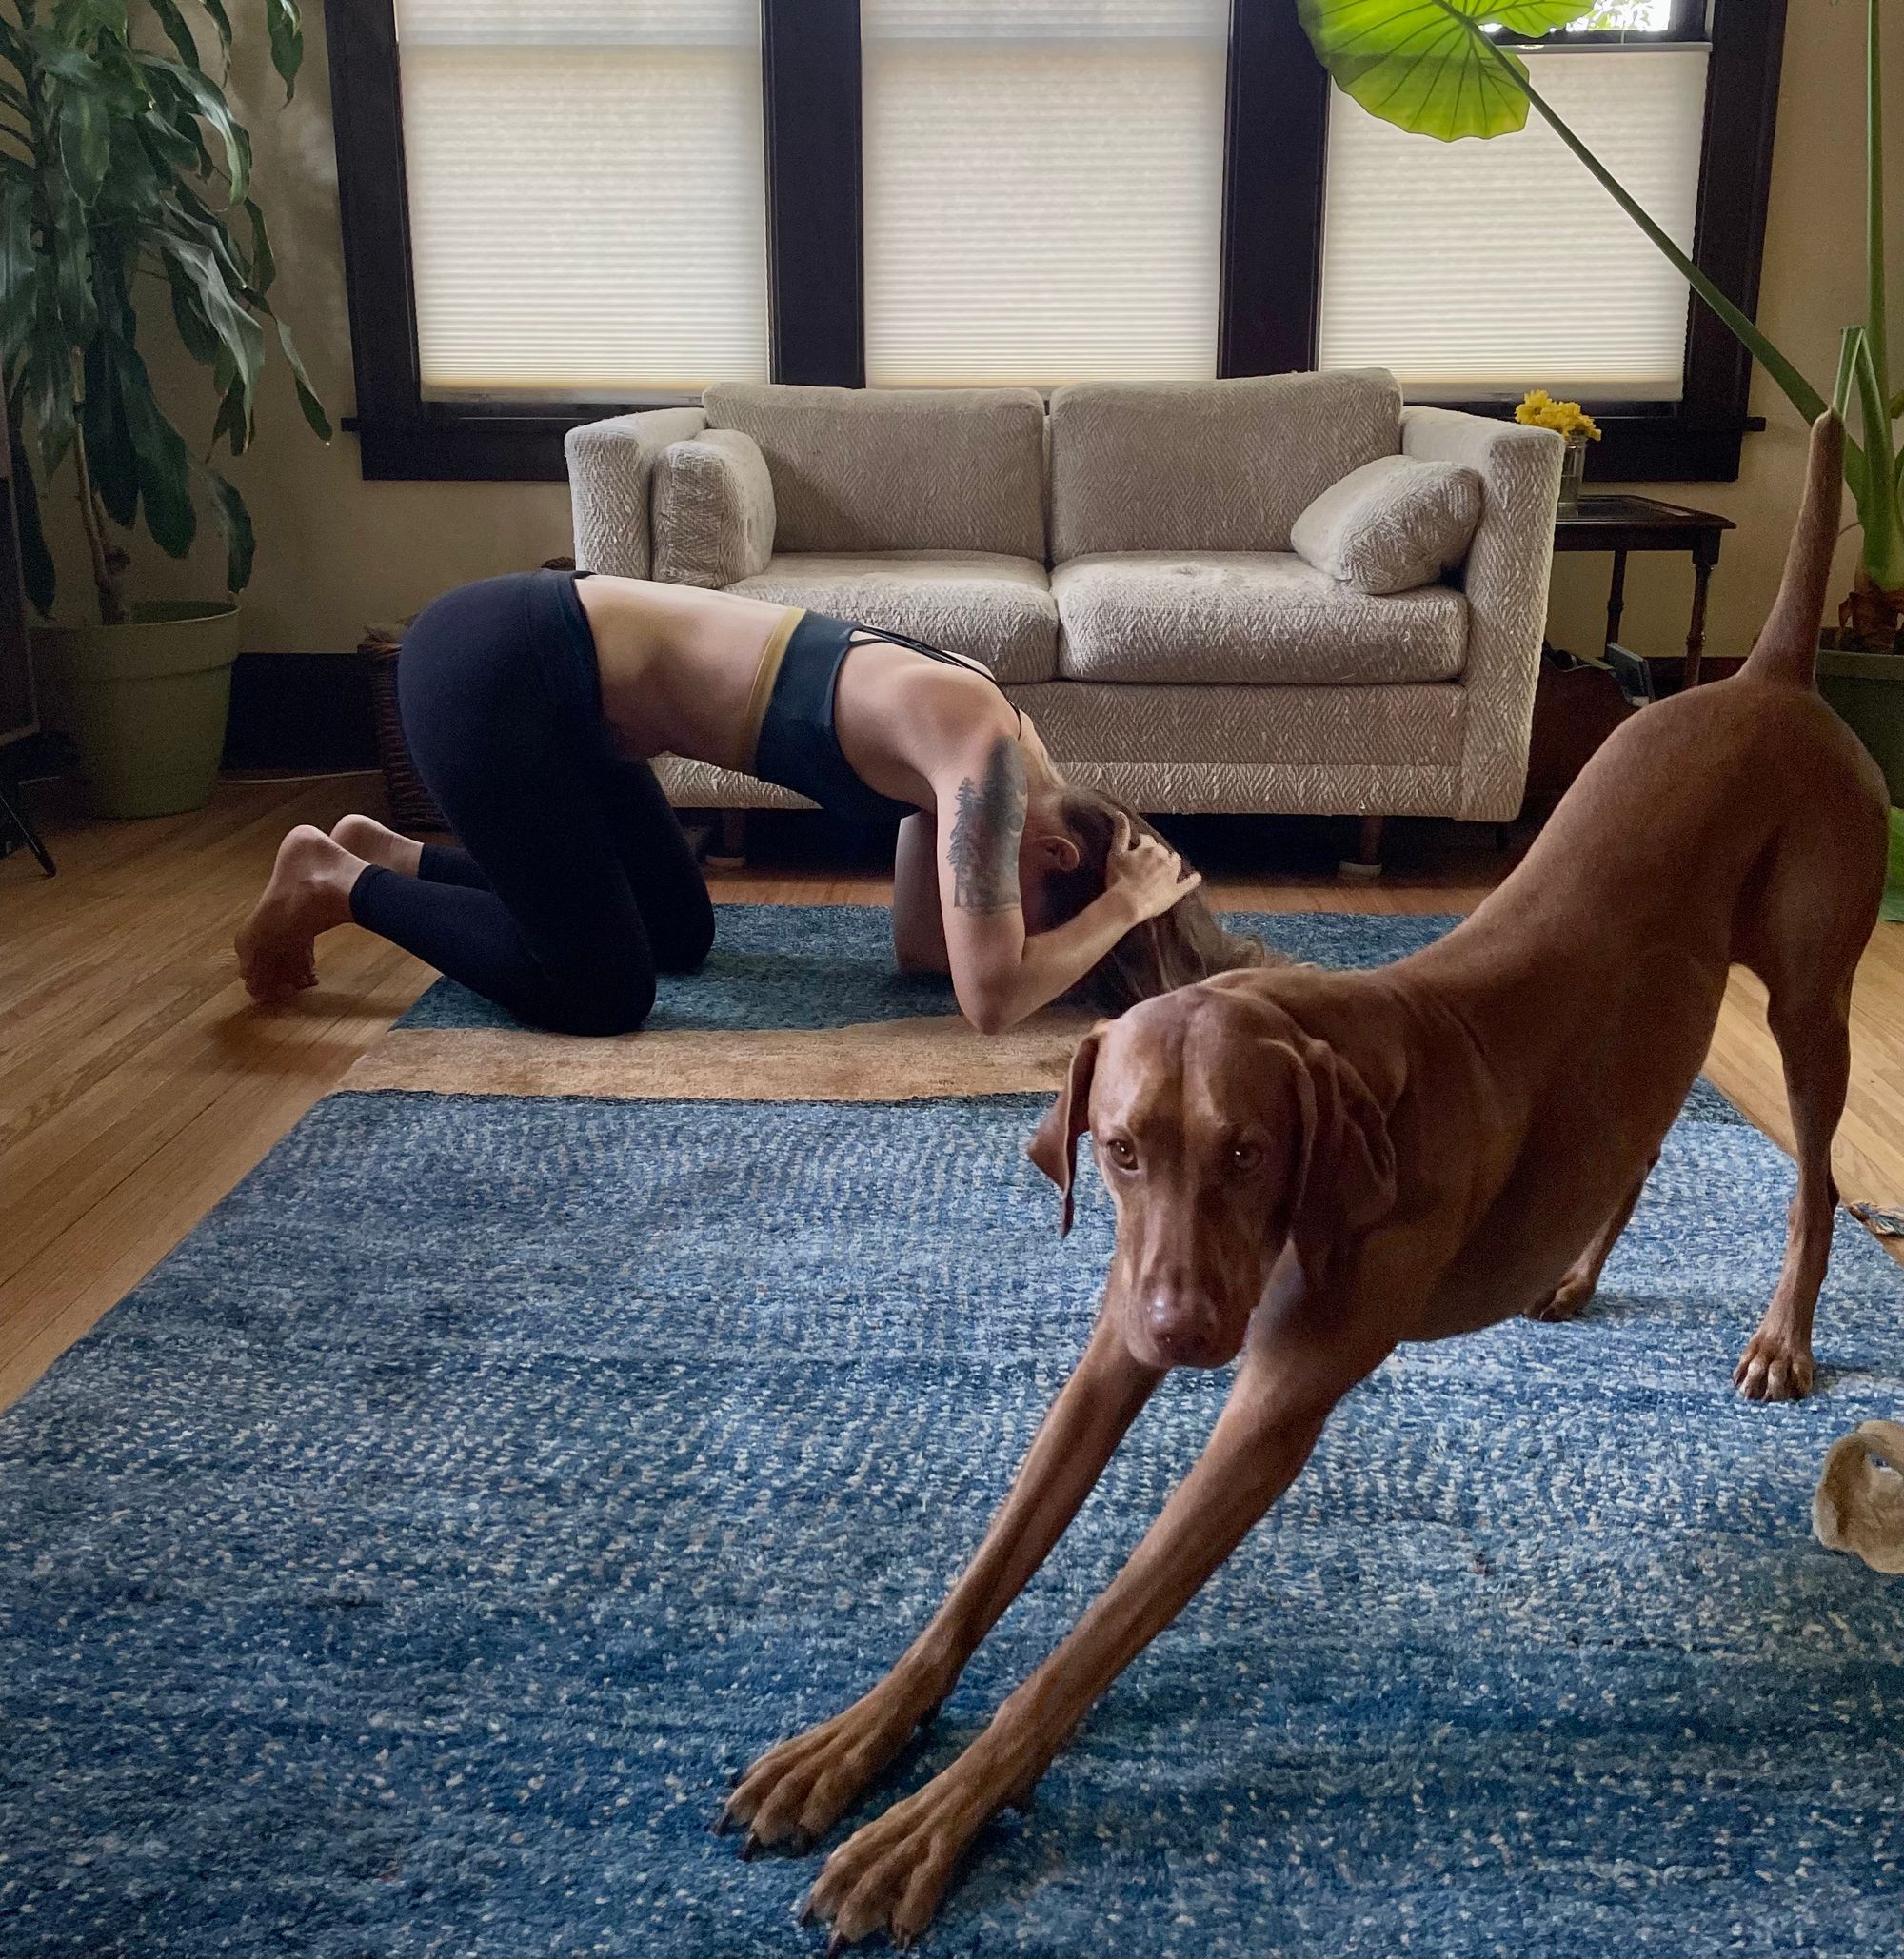 Woman attempting an inversion pose while dog stretches. 